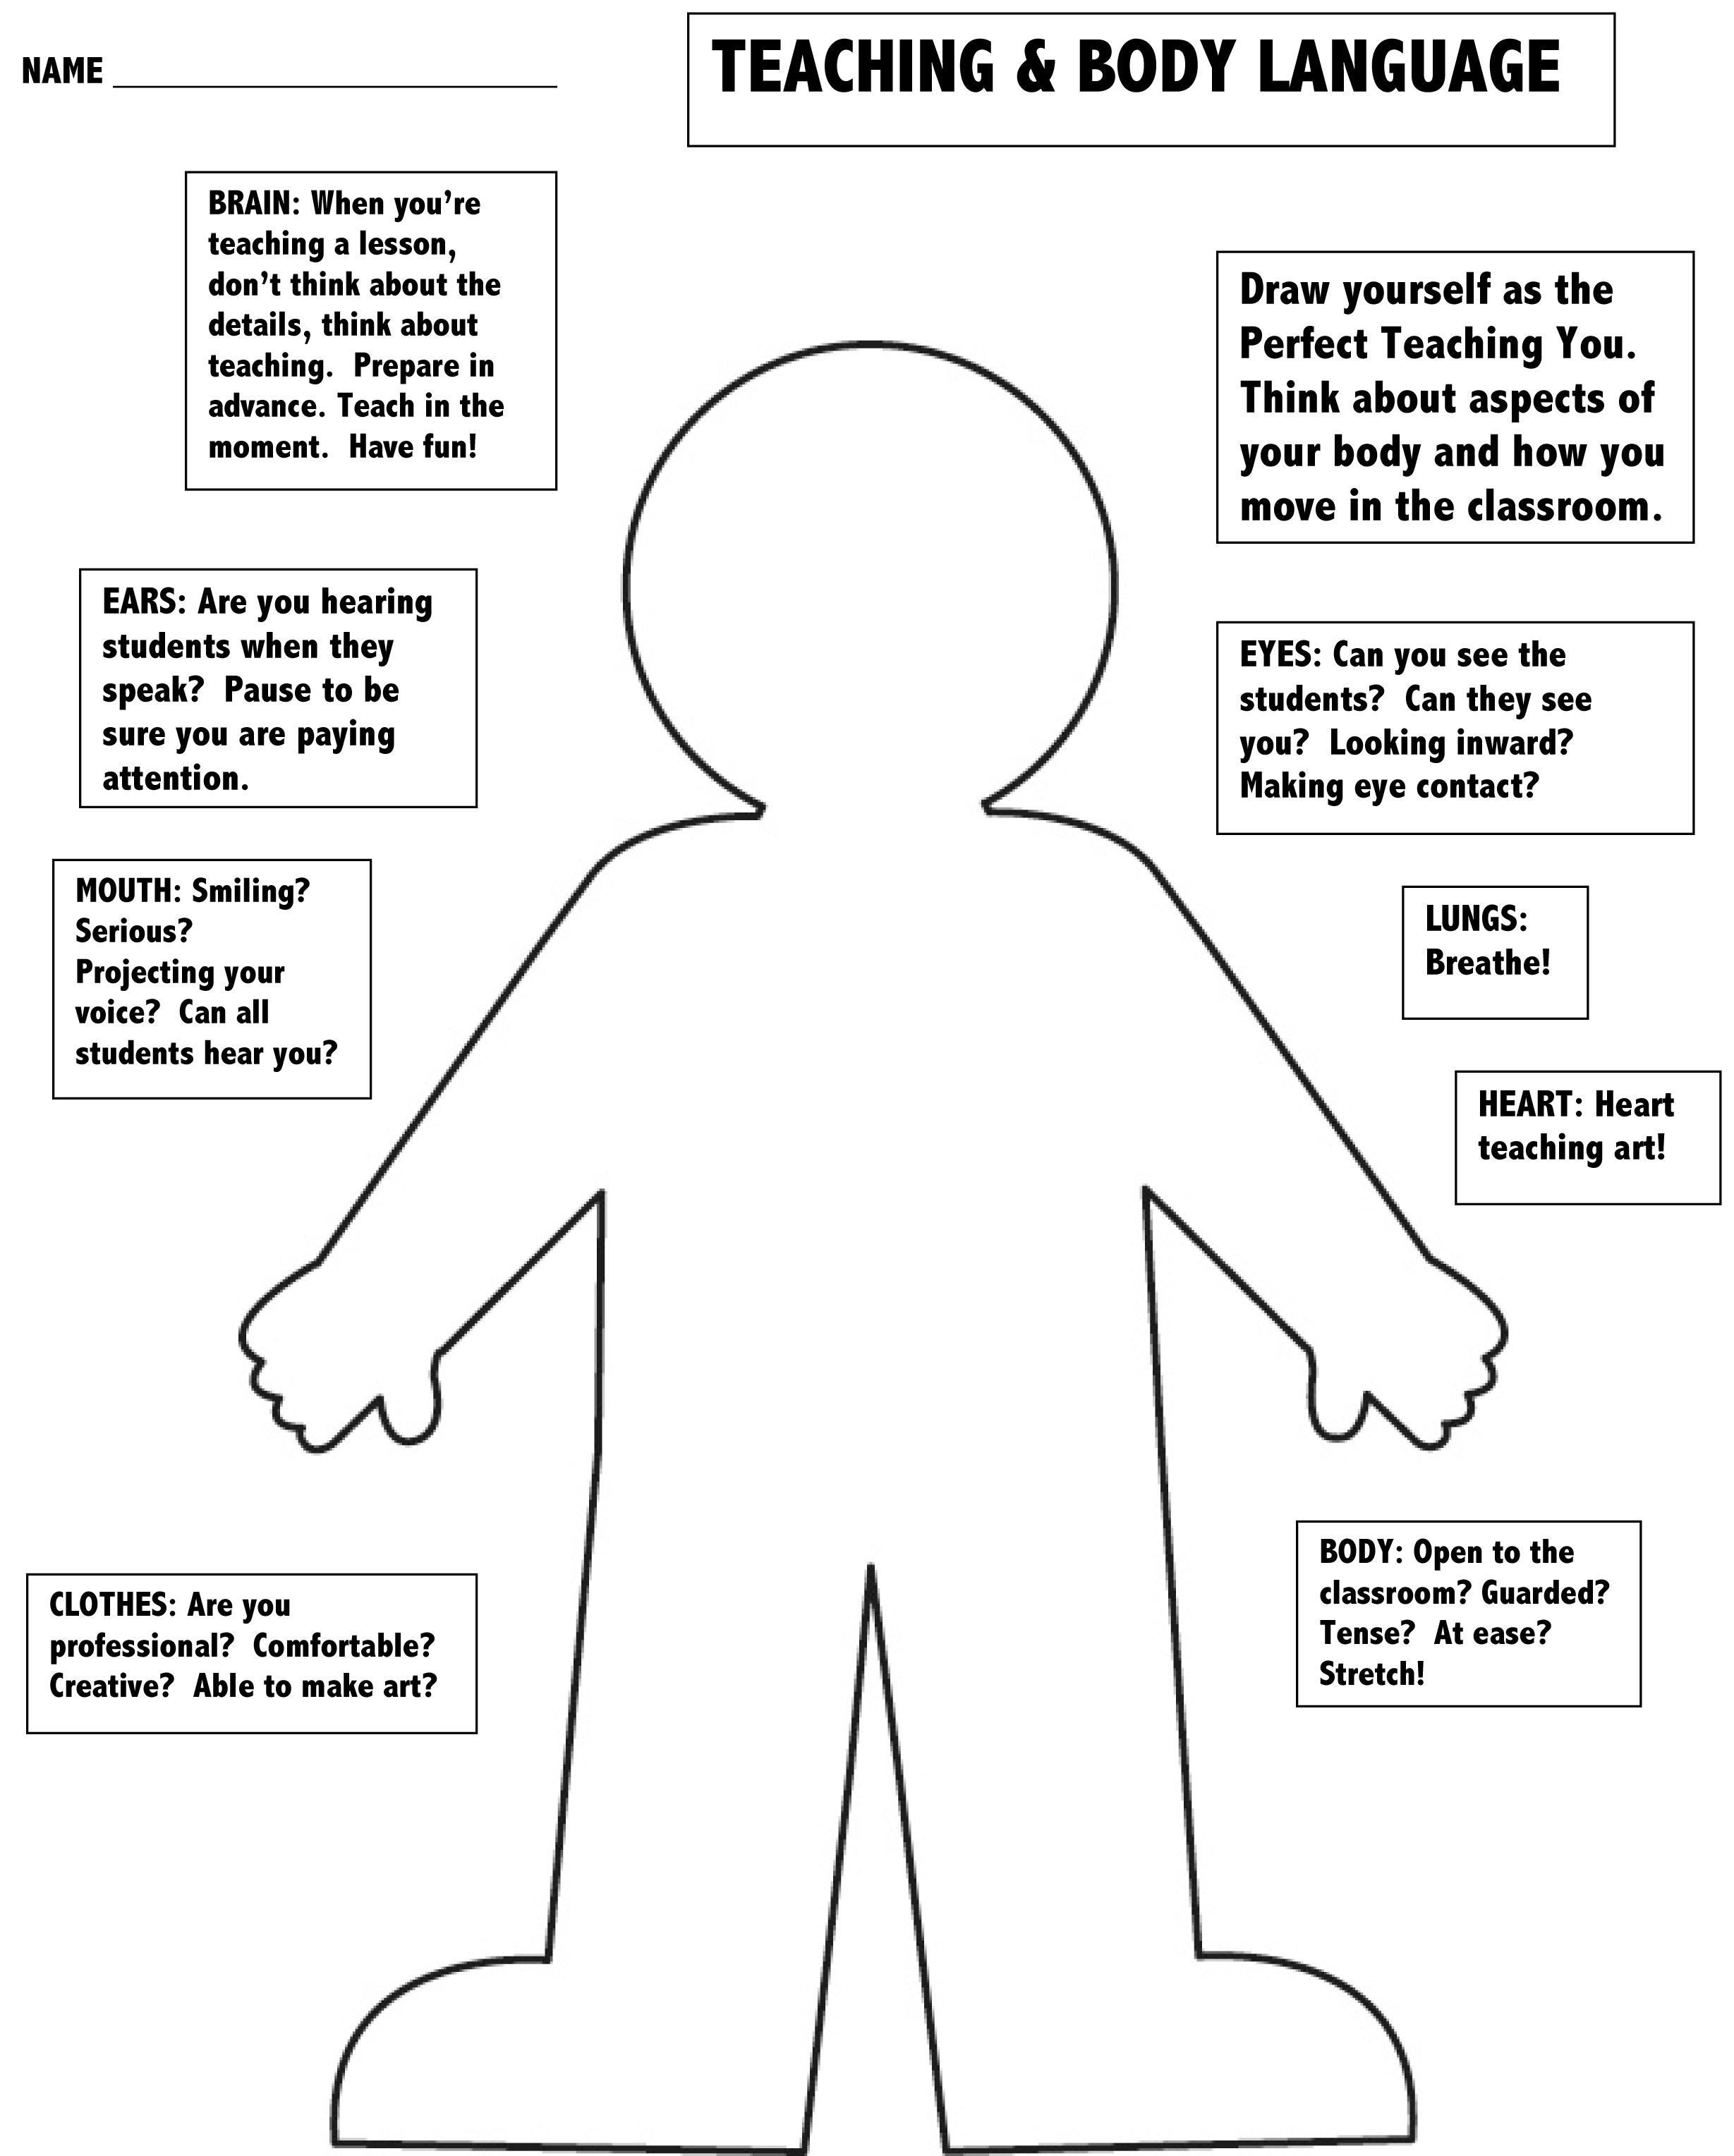 15 Best Images of Personal Space Worksheets Body Language Worksheets